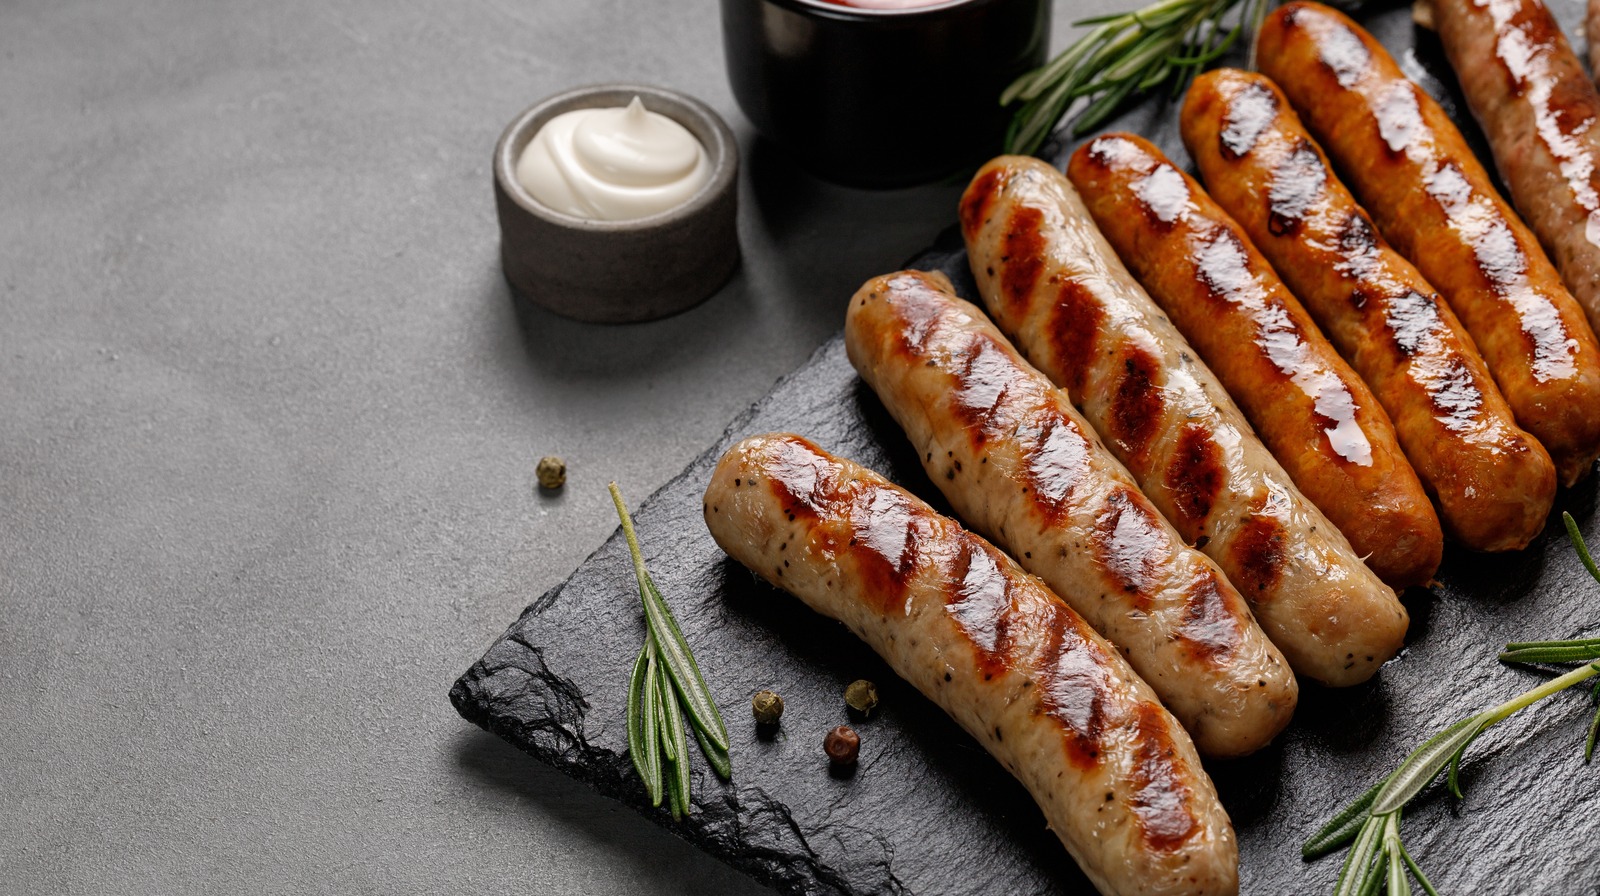 https://www.thedailymeal.com/img/gallery/7-best-sausage-brands-to-buy-at-the-grocery-store-and-7-you-might-want-to-avoid/l-intro-1694784876.jpg